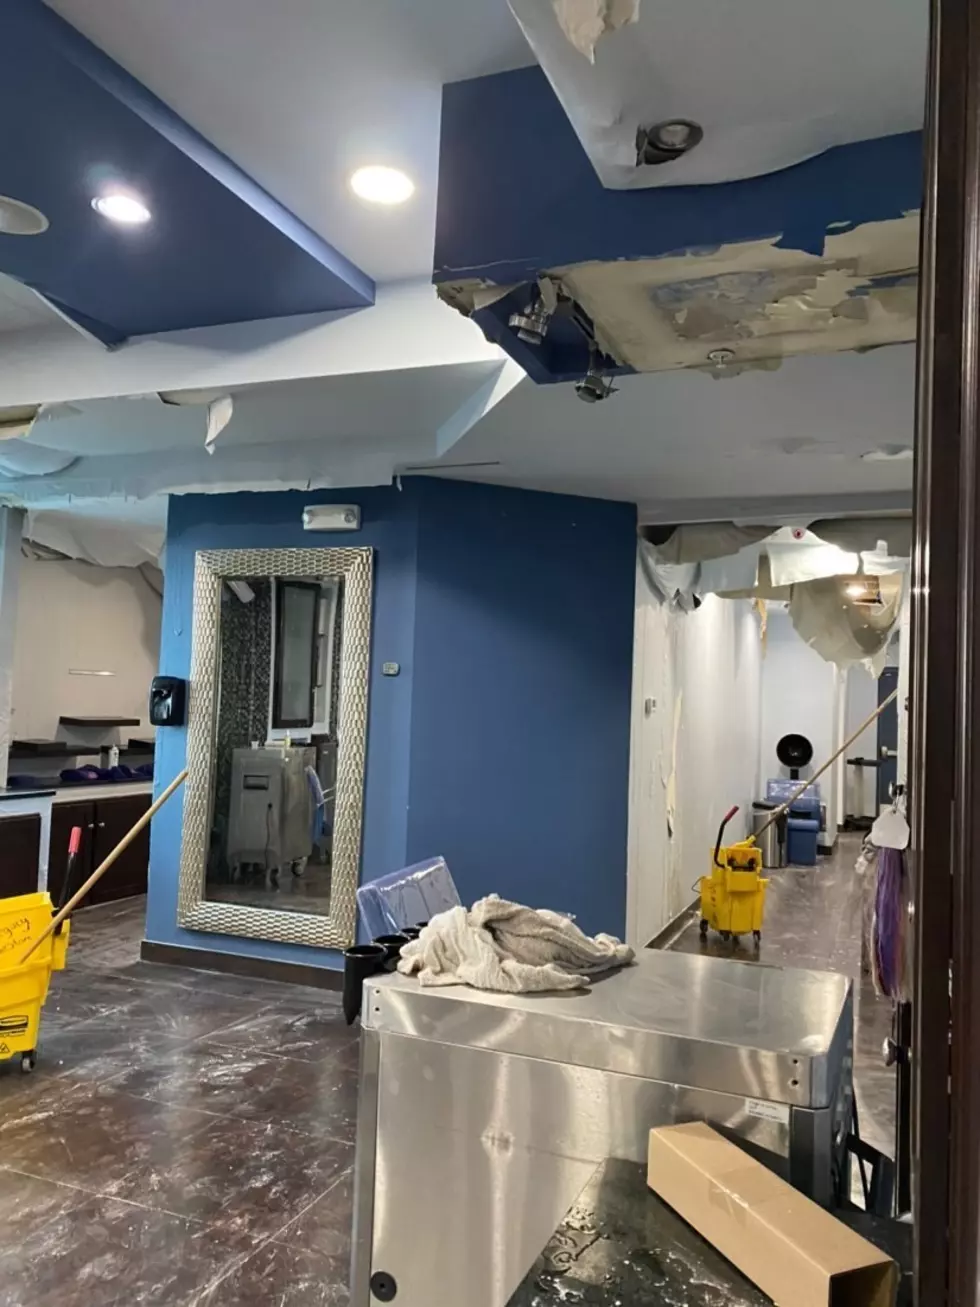 Mix Salon Spa Shares Photos of Water Damage Caused by Texas Weather